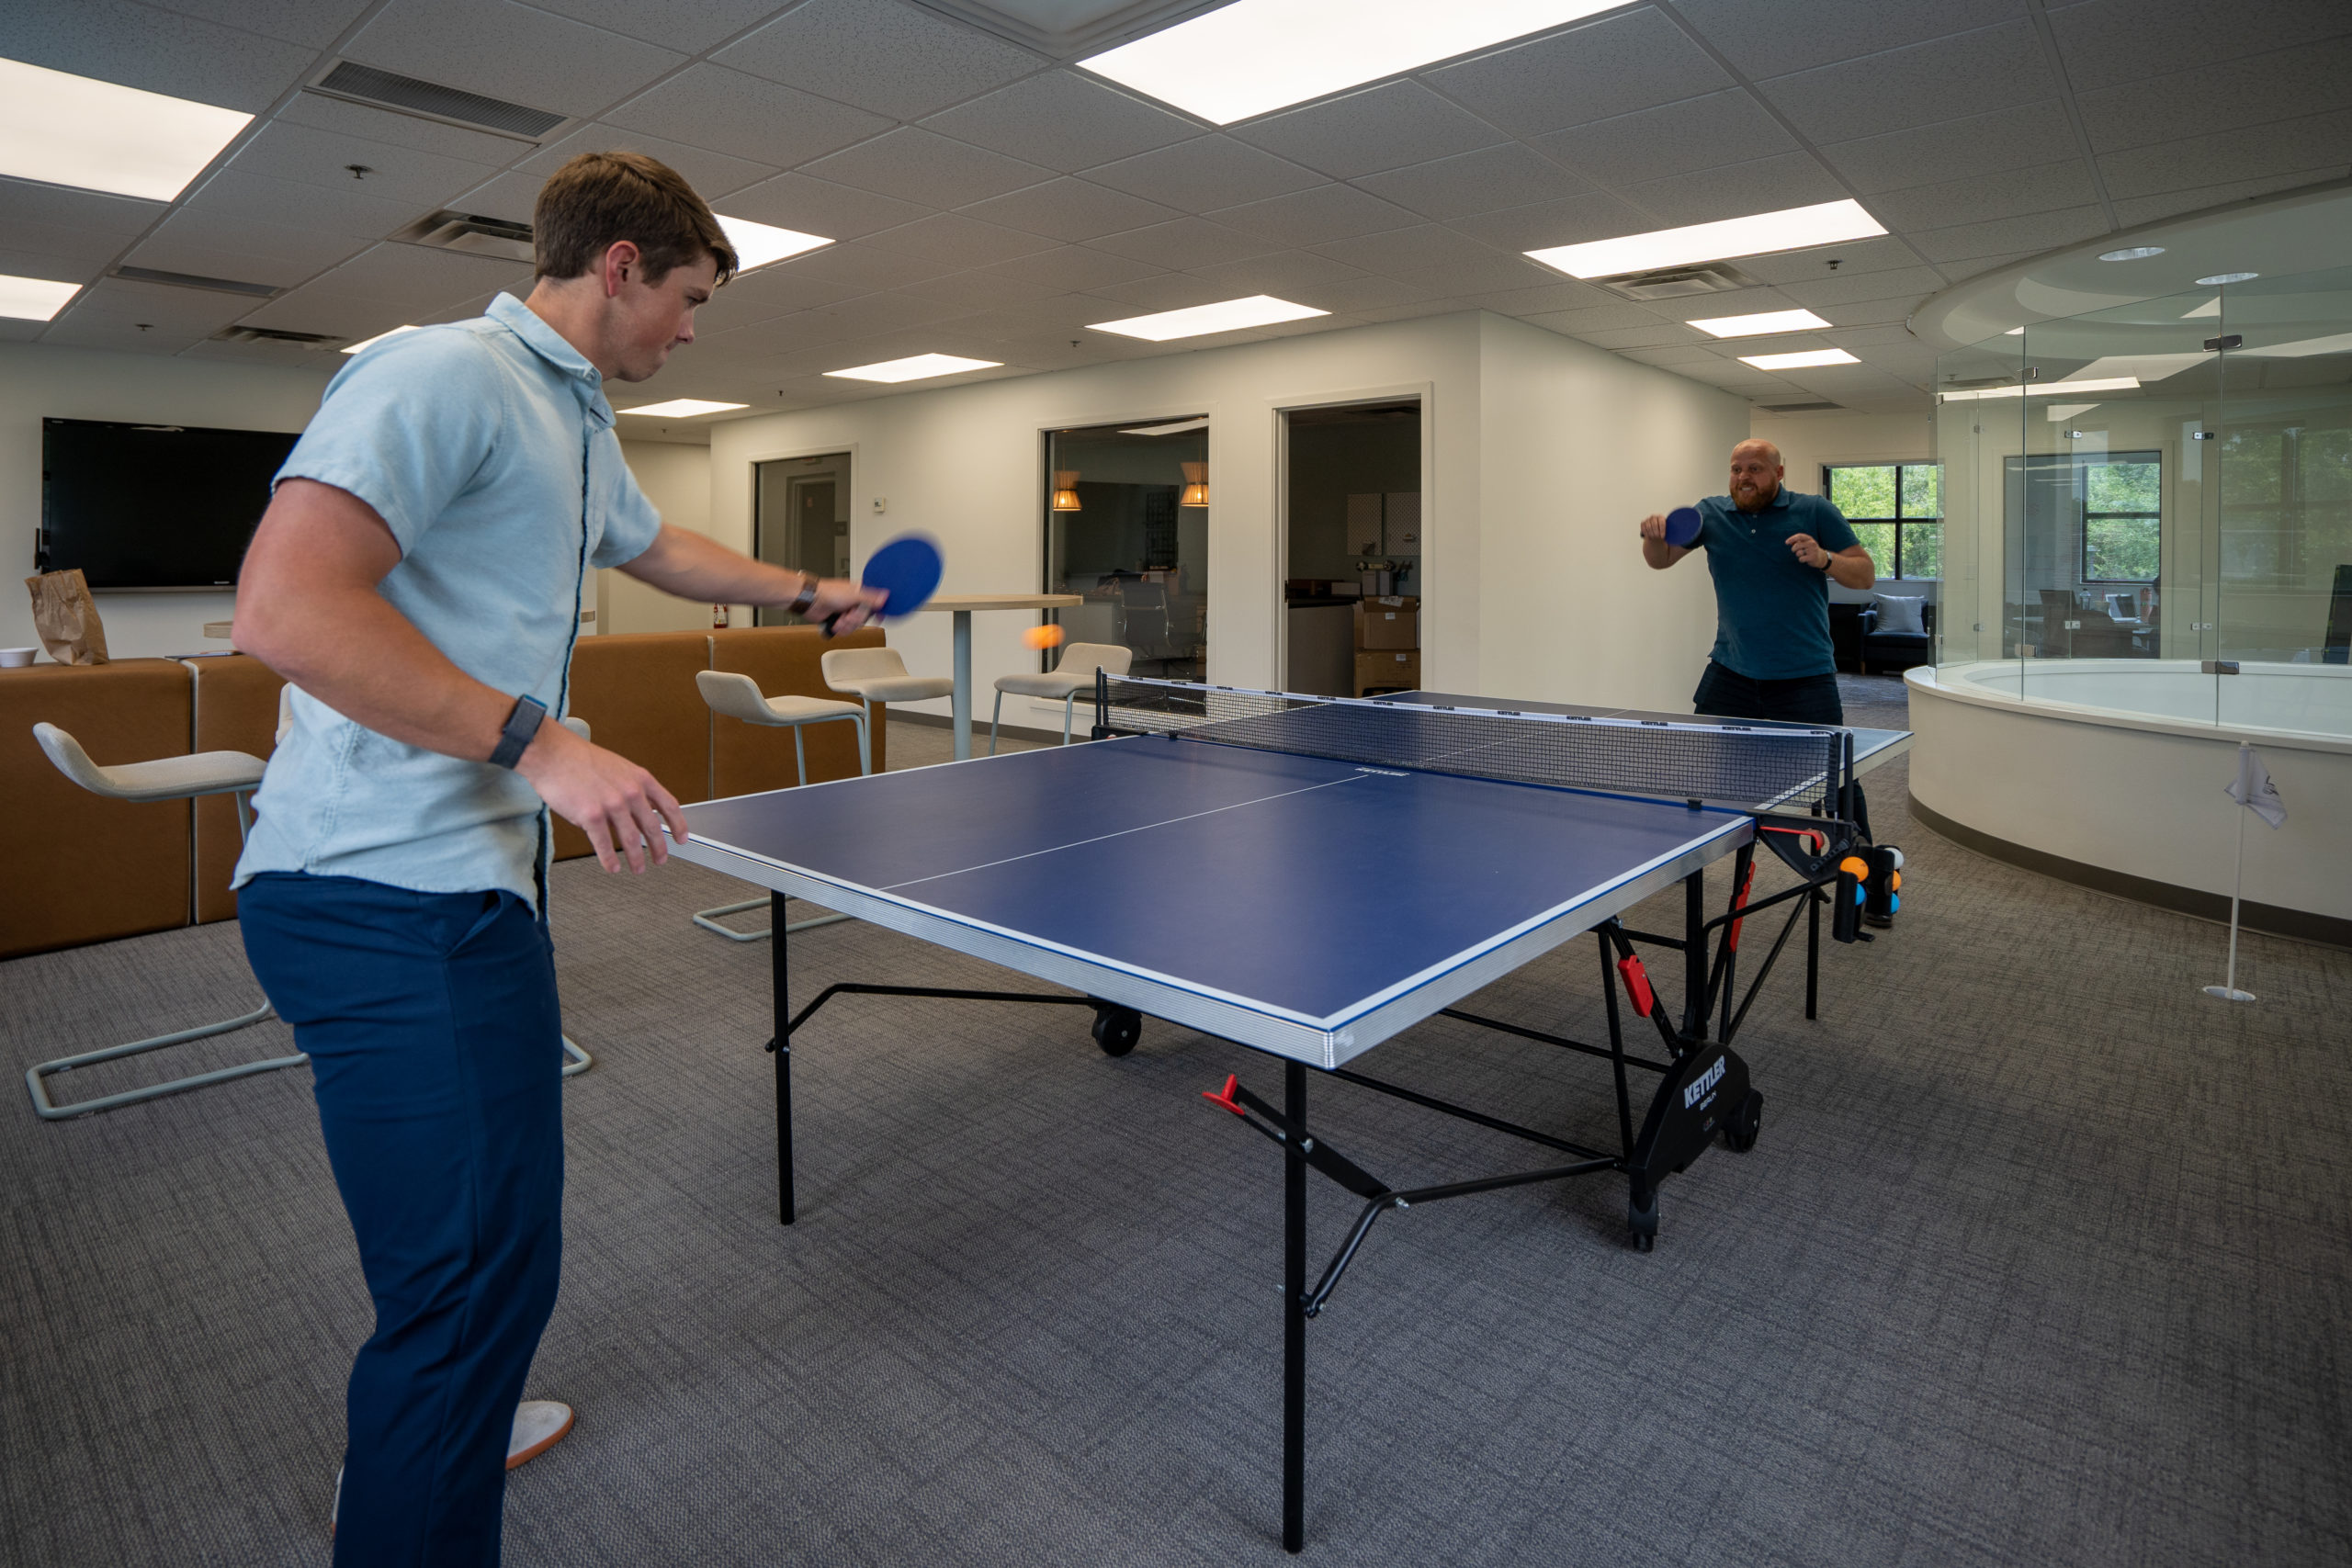 Explore career opportunities at iMethods and join in on a game of ping-pong